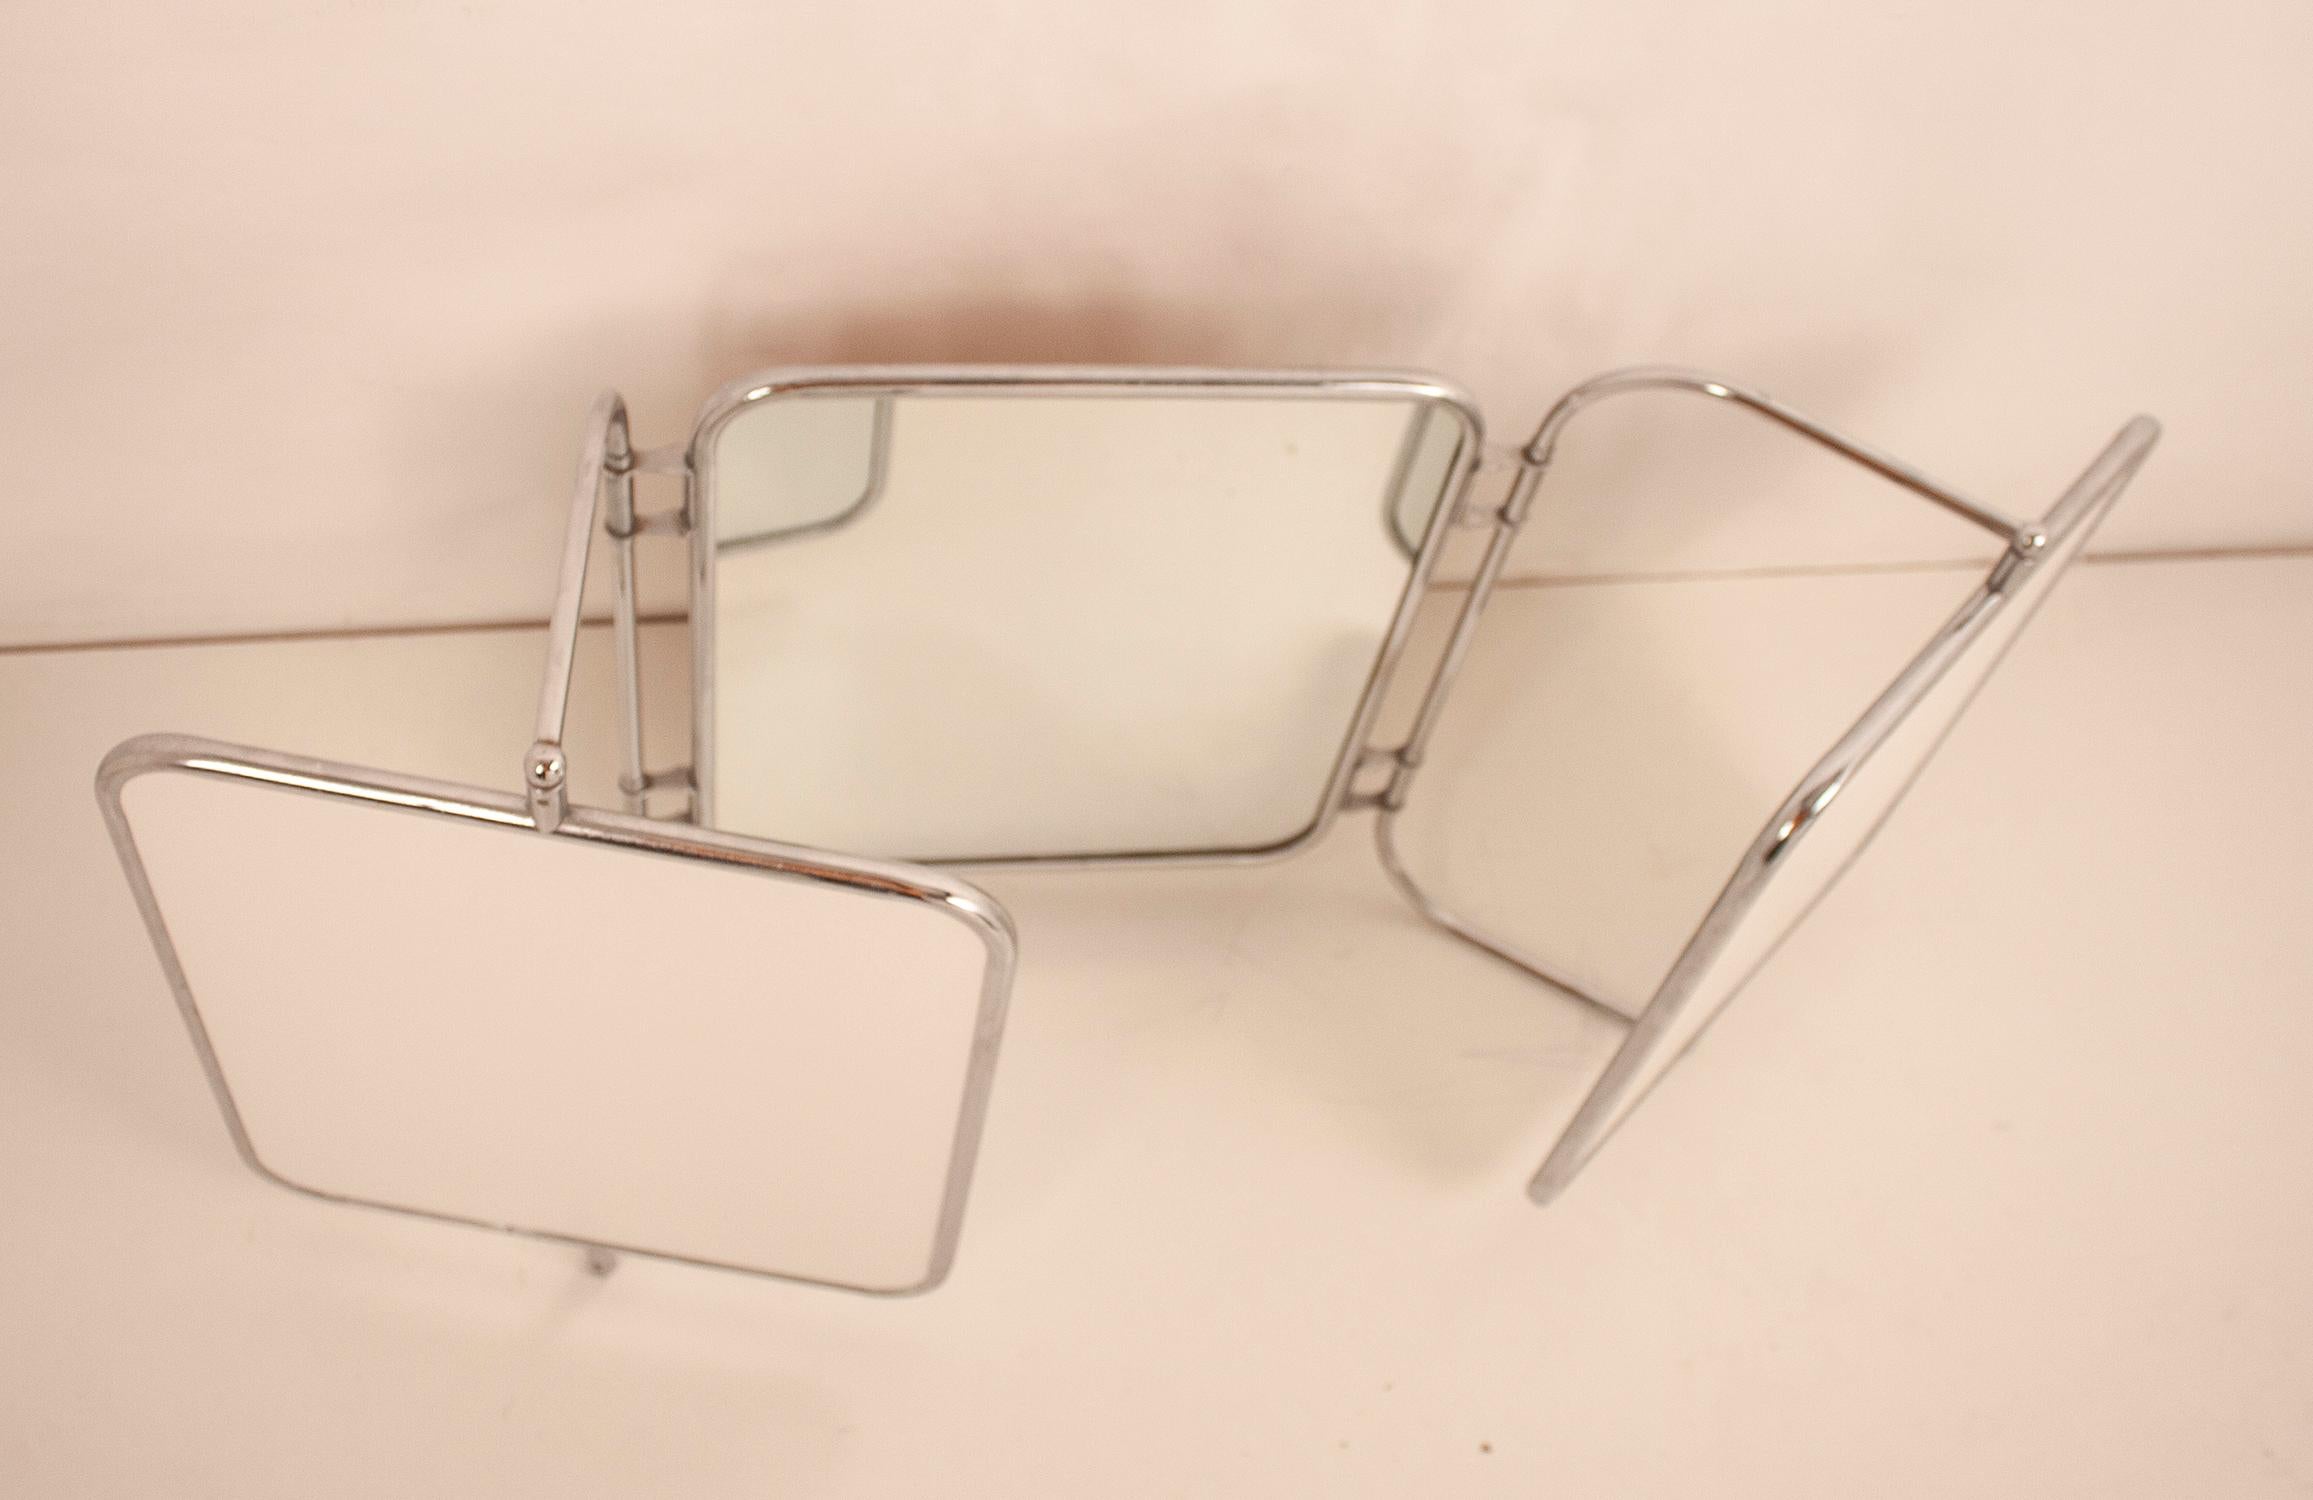 Midcentury Triptych Wall Mirror, White Bakelite and Chrome, Spain, 1940s 4